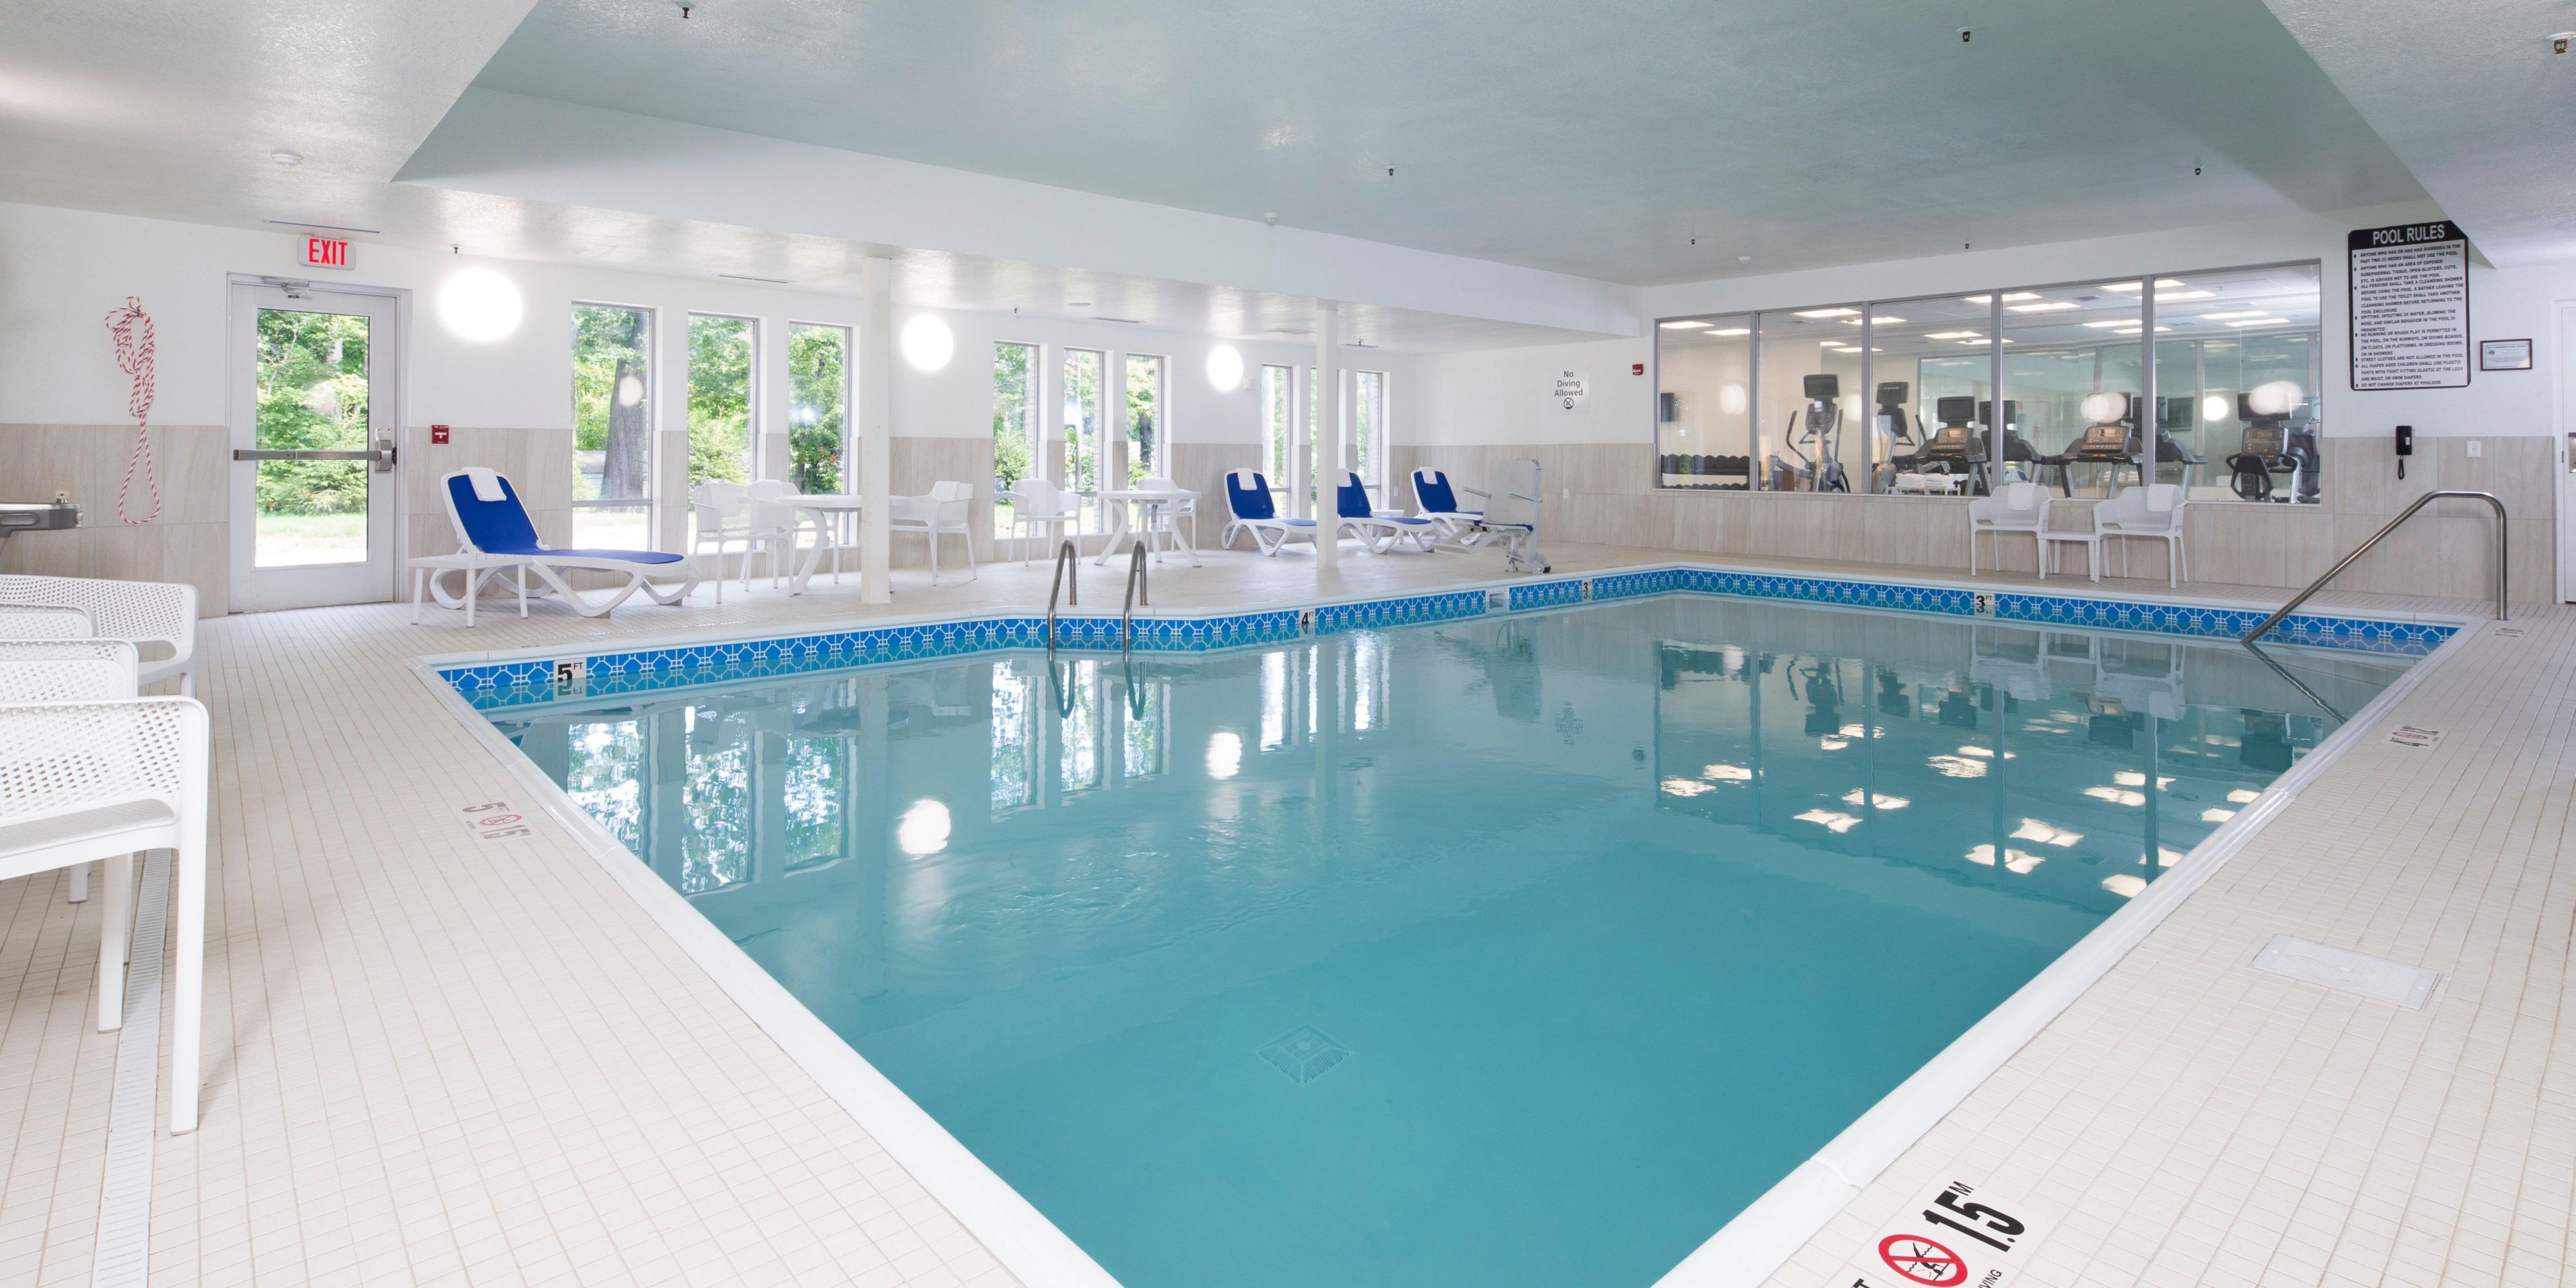 The kids will love our indoor heated pool. The pool is open from 10am until 9pm daily. 